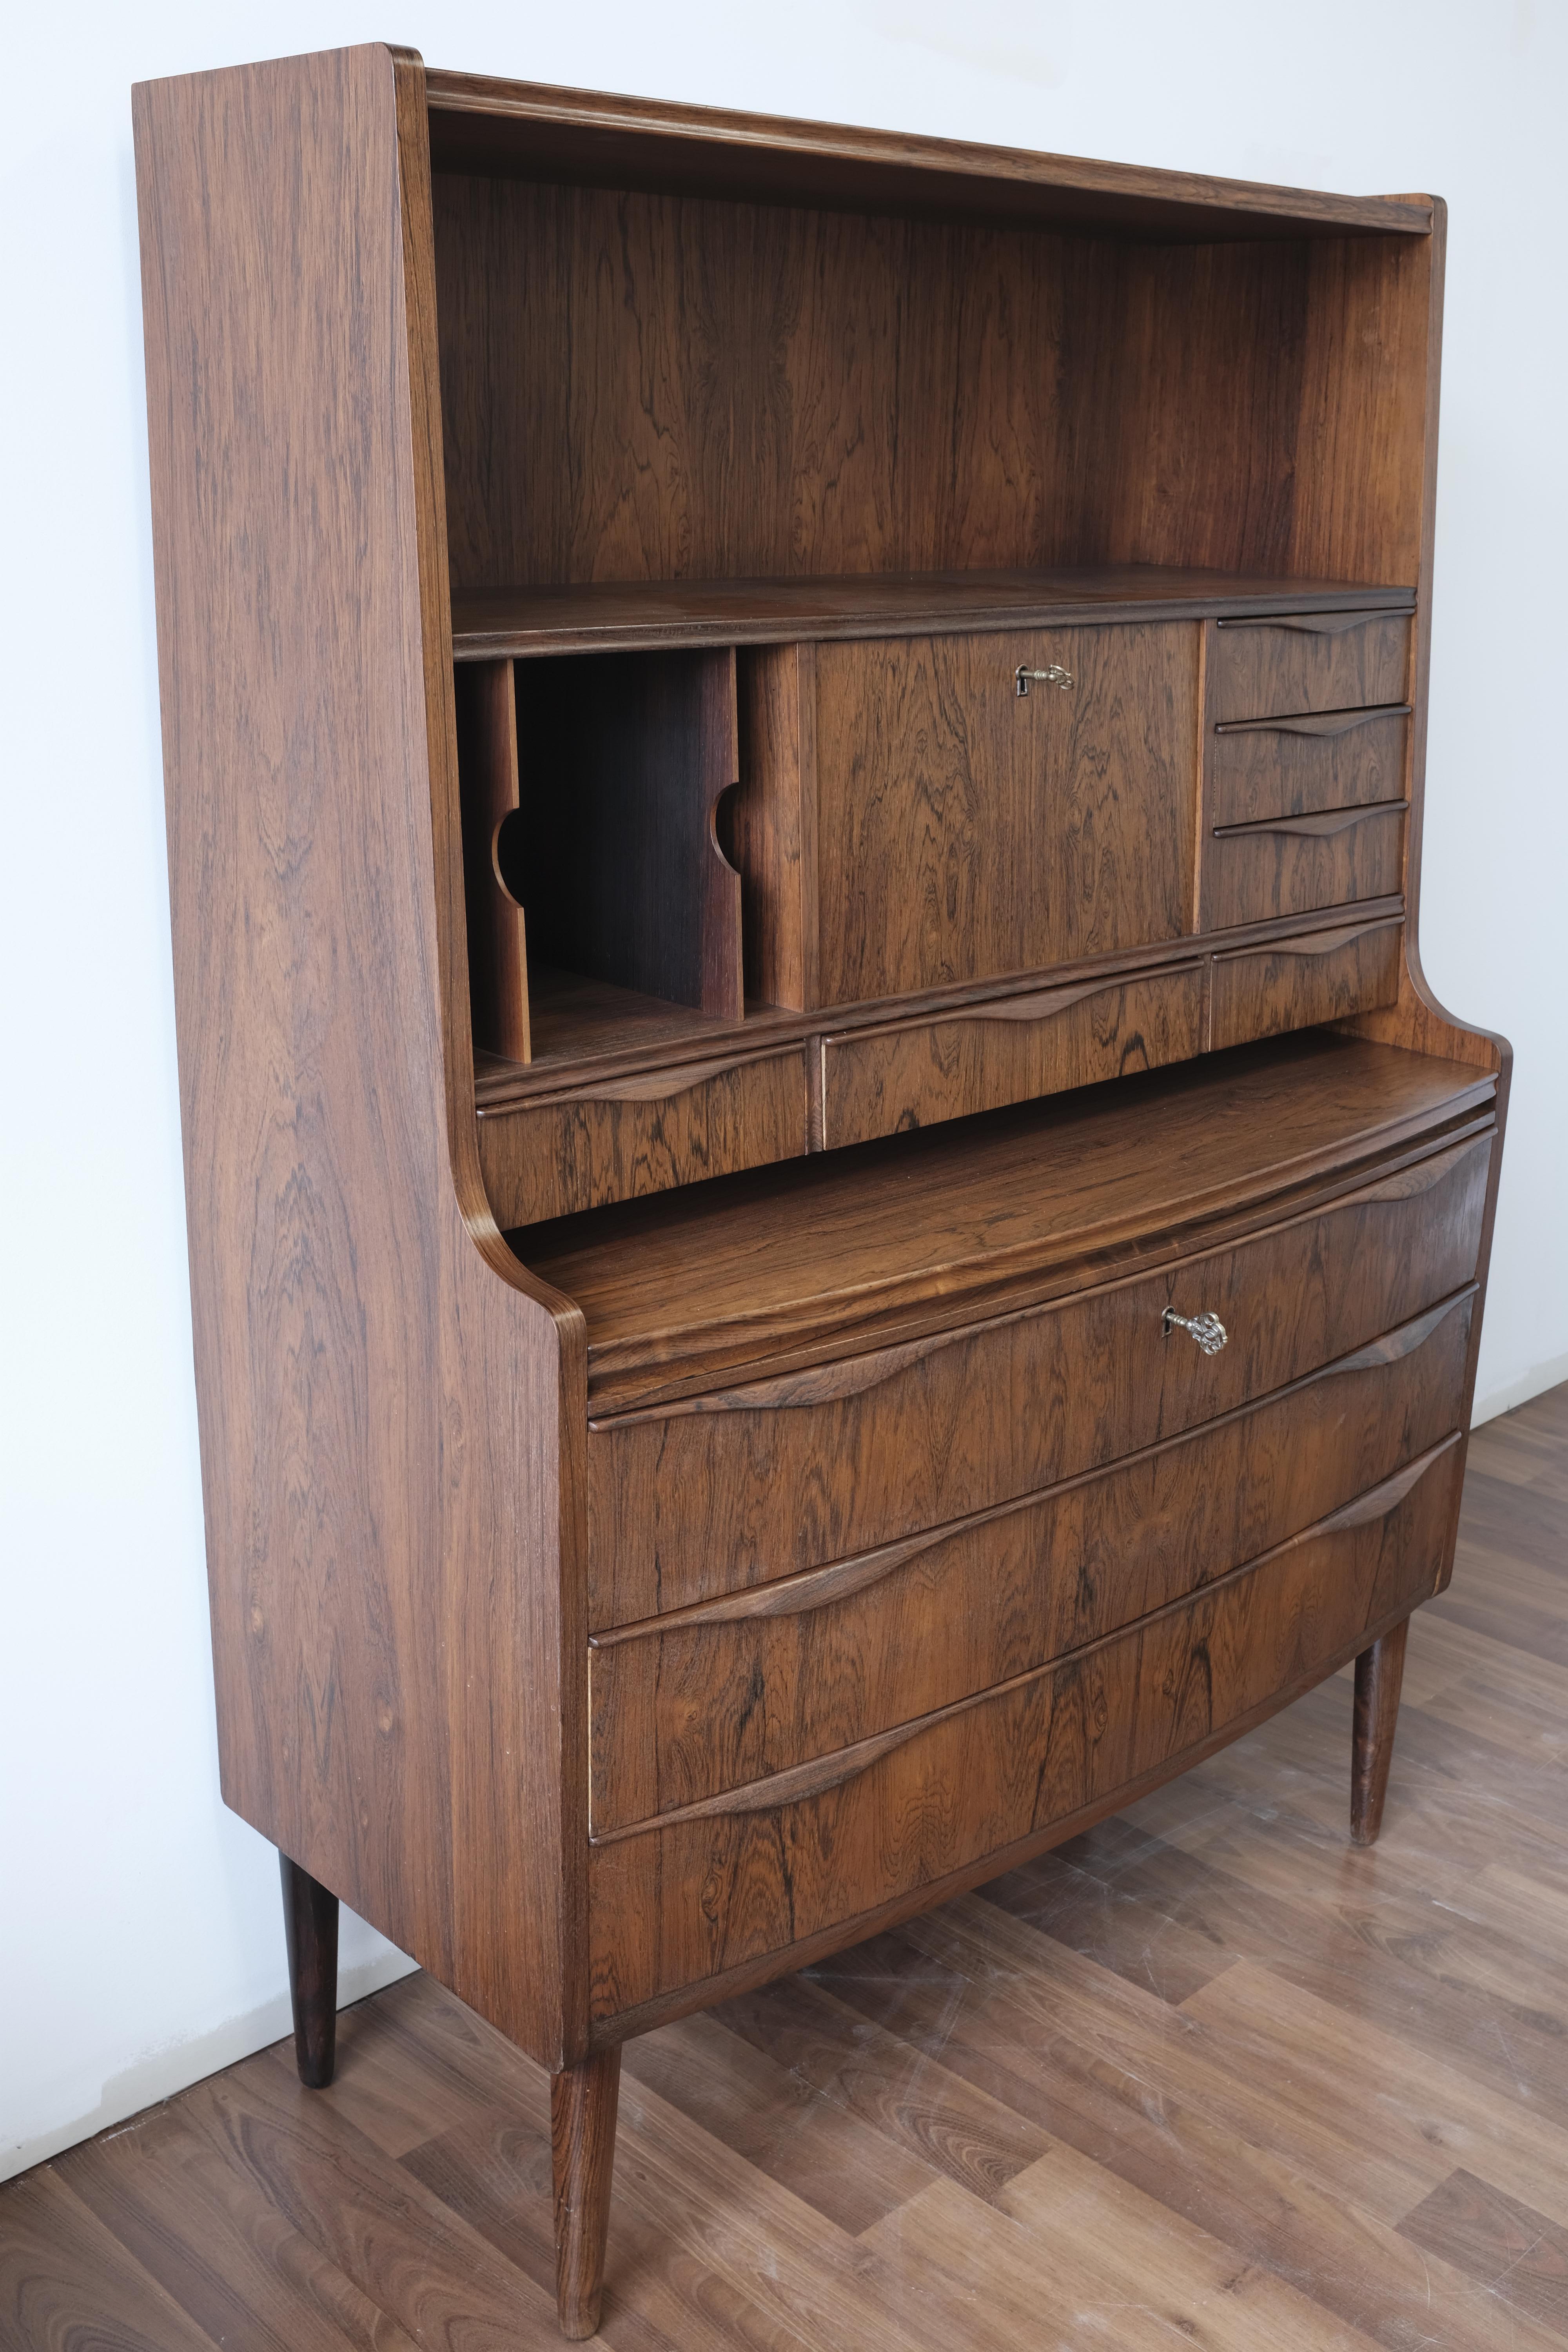 Rosewood secretary designed by Ib Kofod-Larsen and manufactured by A. Andersen & Bohm cabinetmakers.

The piece is constructed of solid wood with rosewood veneers, edging and drawer pulls, and features three lower drawers with a gentle outward